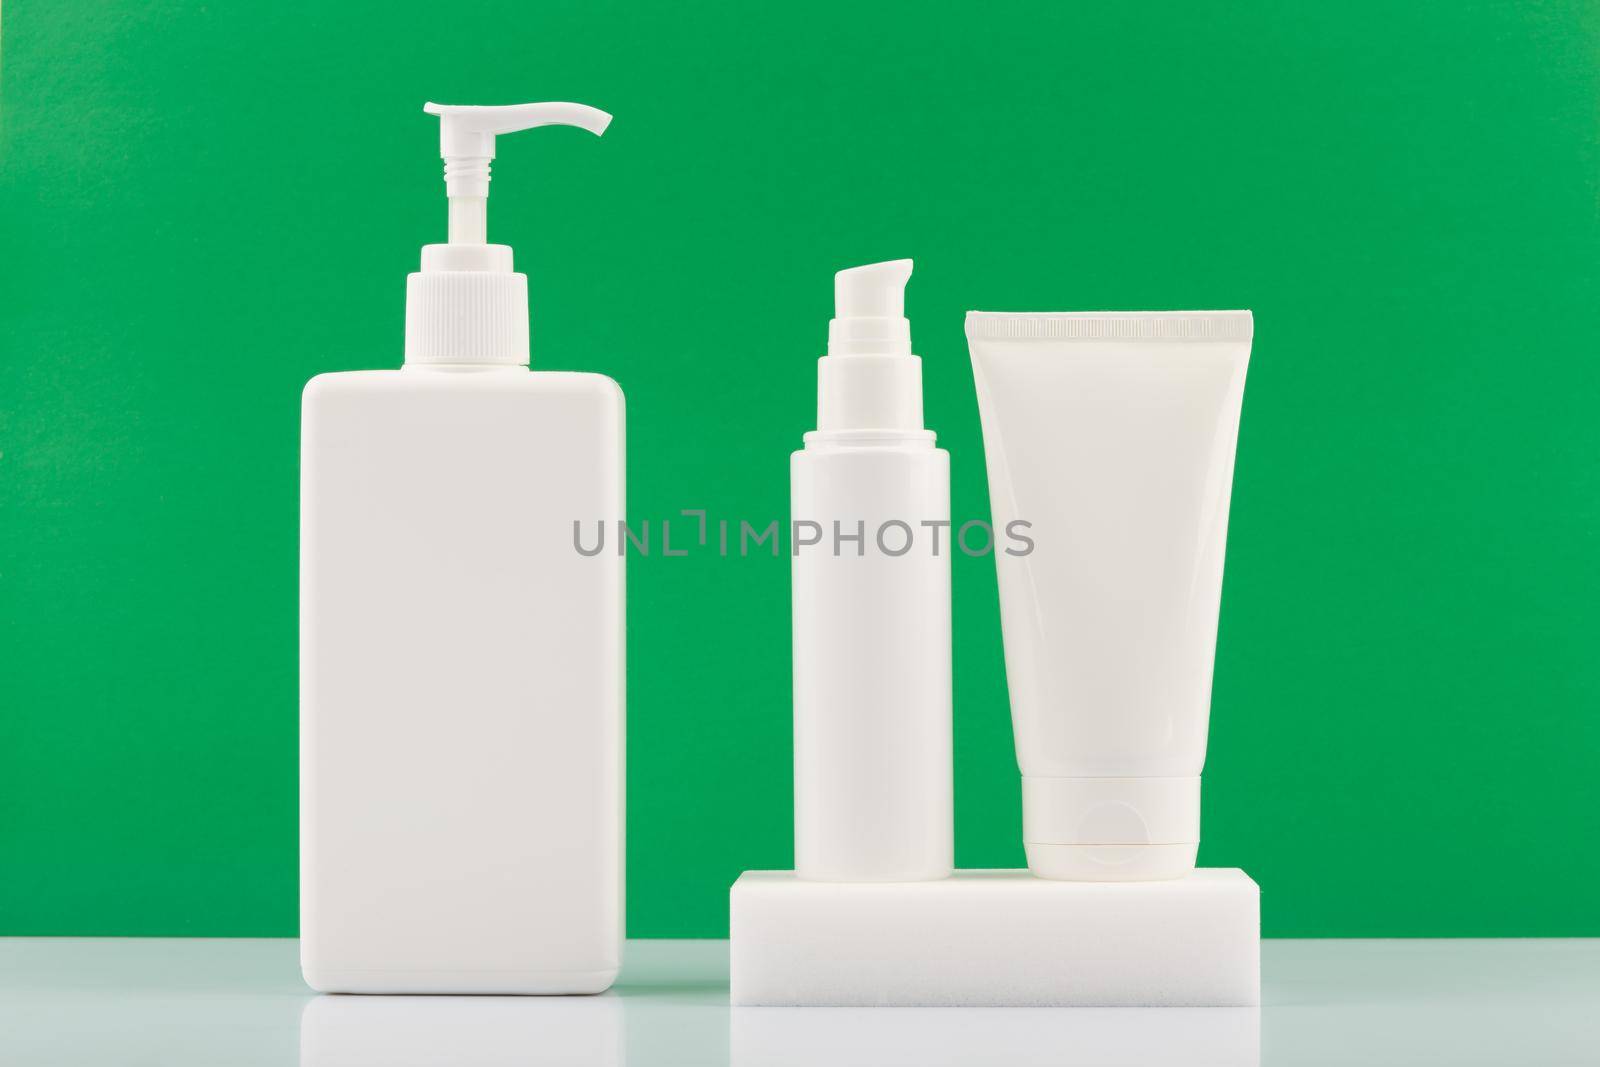 Skincare products in white plastic tubes on white table against green background. Concept of organic beauty products for fresh, young looking skin. Moisturizing or anti aging products.